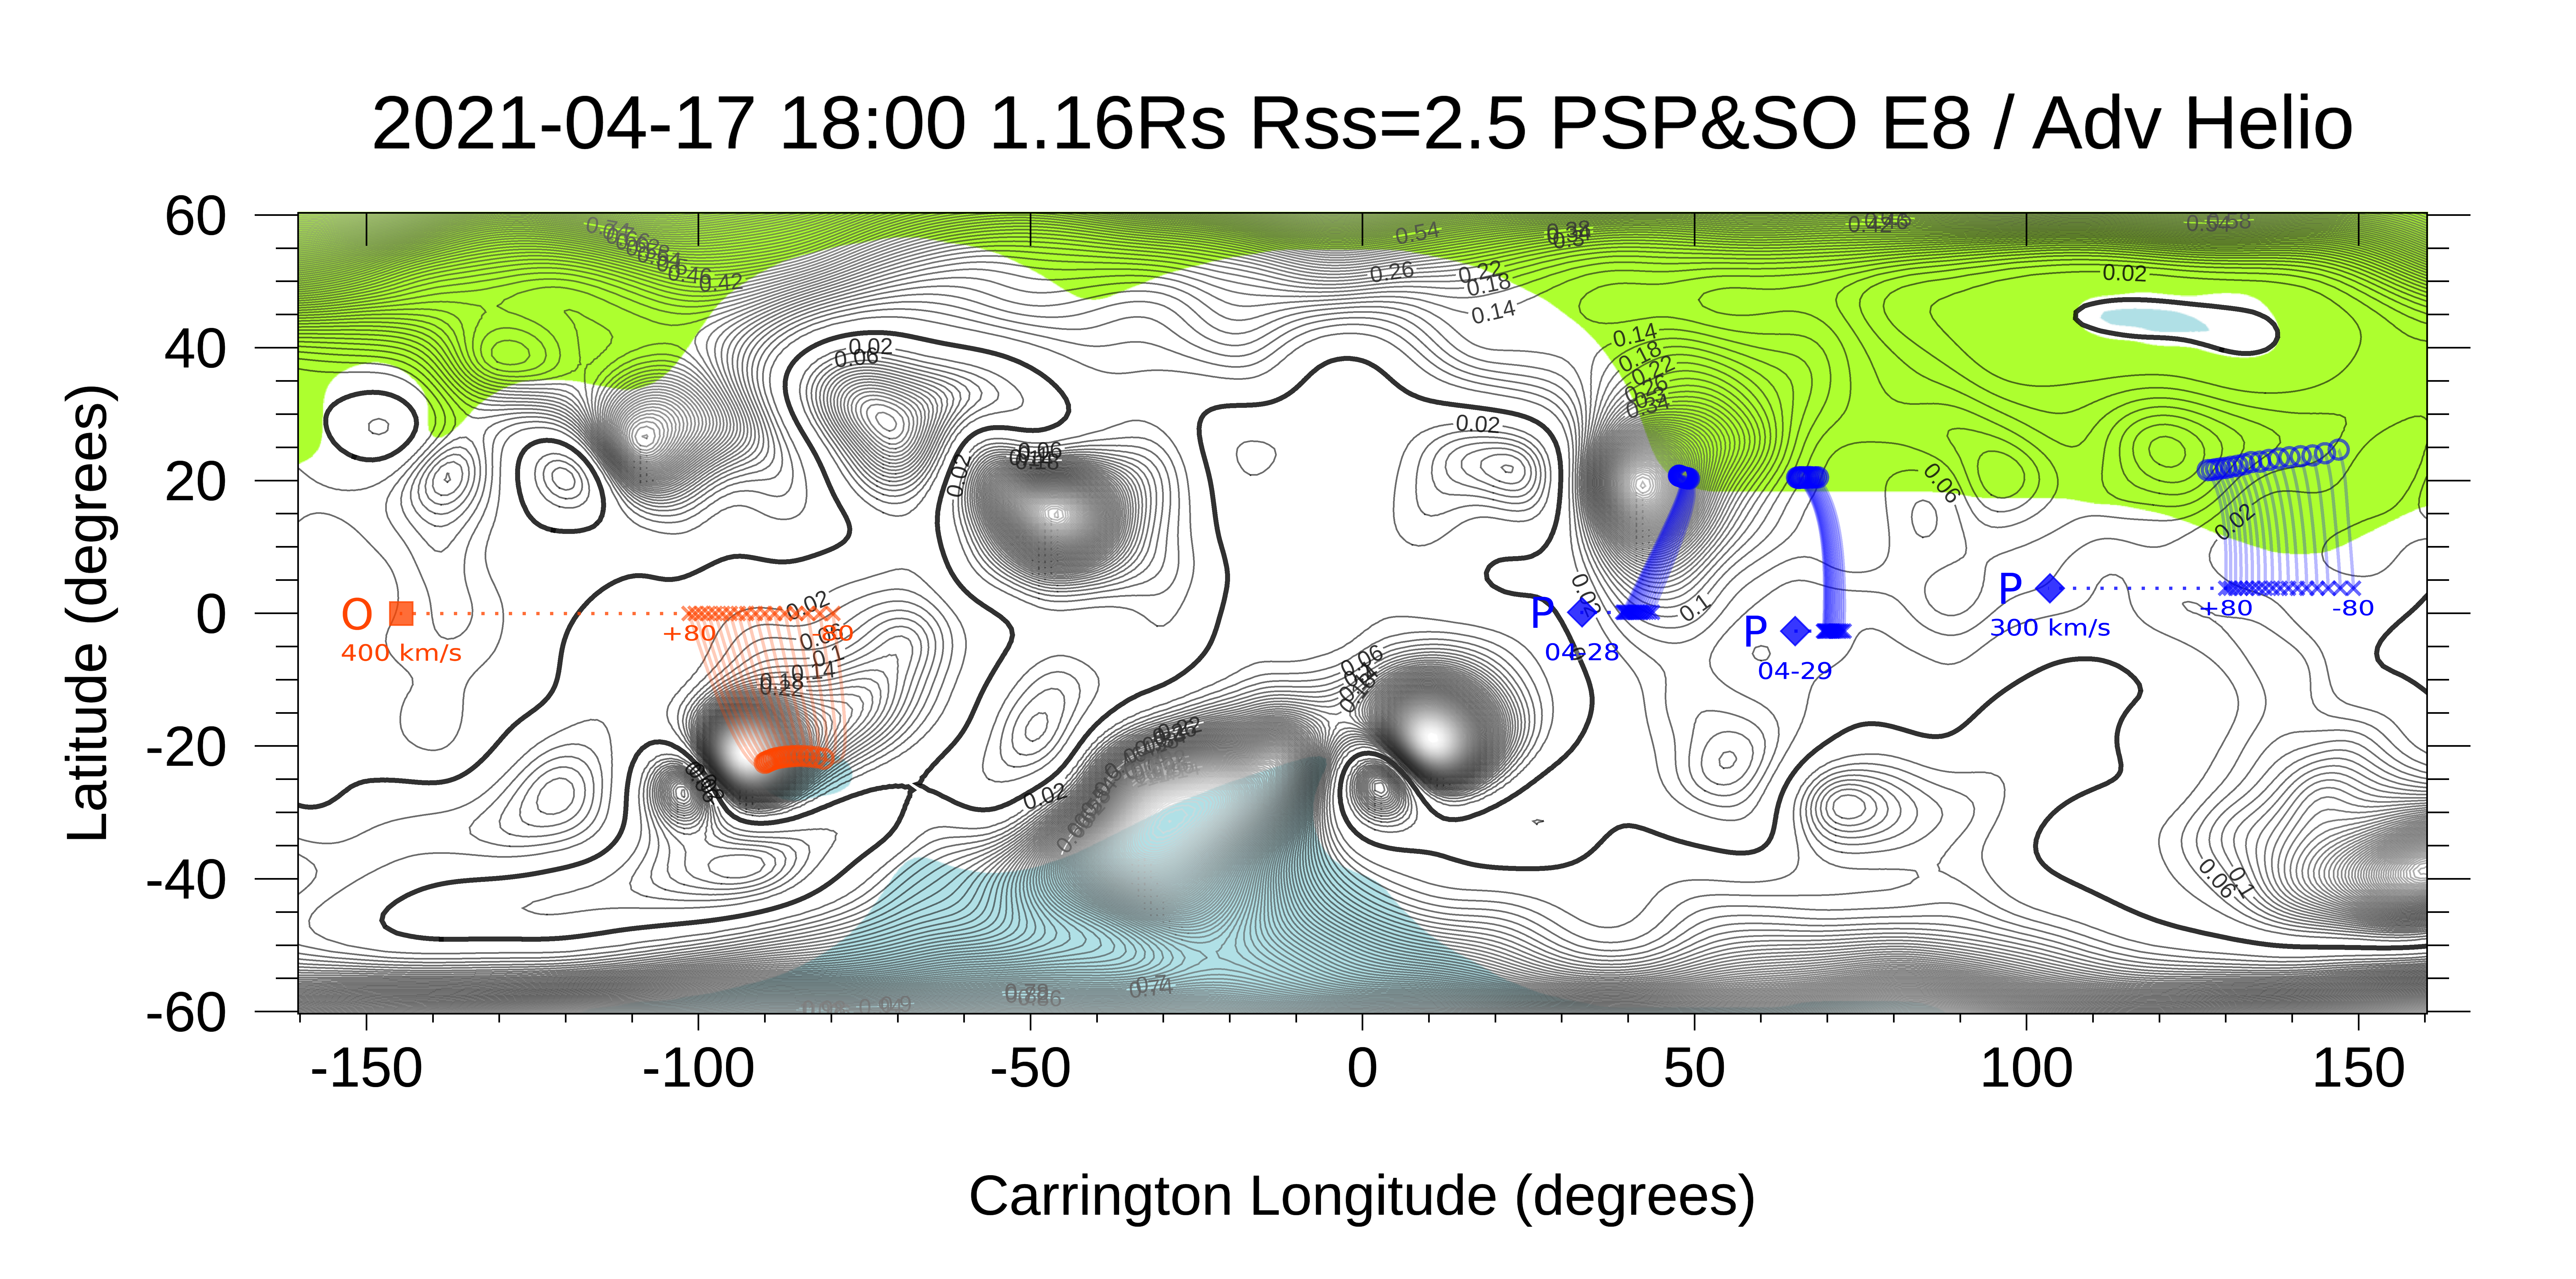 April 17, 2021 18:00 UT magnetic map and connectivity predictions for E8: PSP connections shown for April 17, 28 and 29; Solar Orbiter connections shown for April 17.